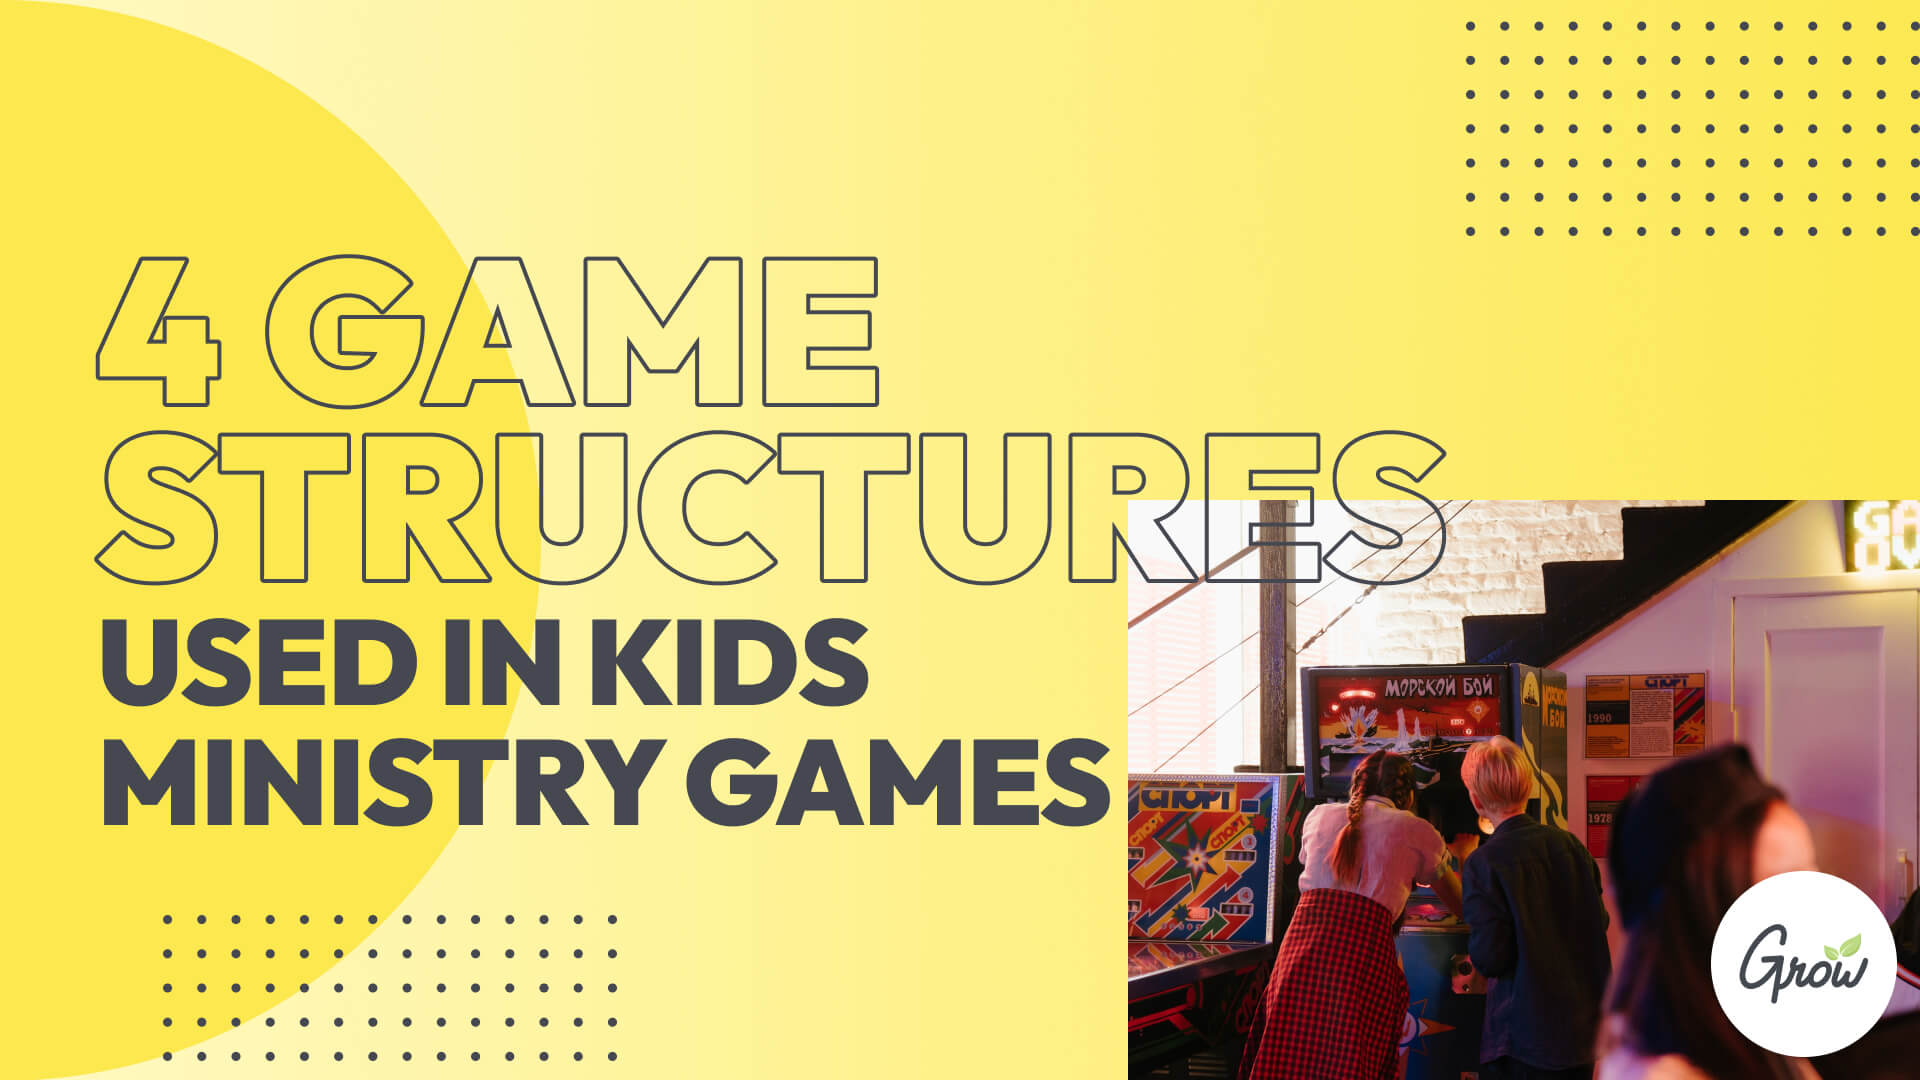 4 Game Structures Used in Kids Ministry Games